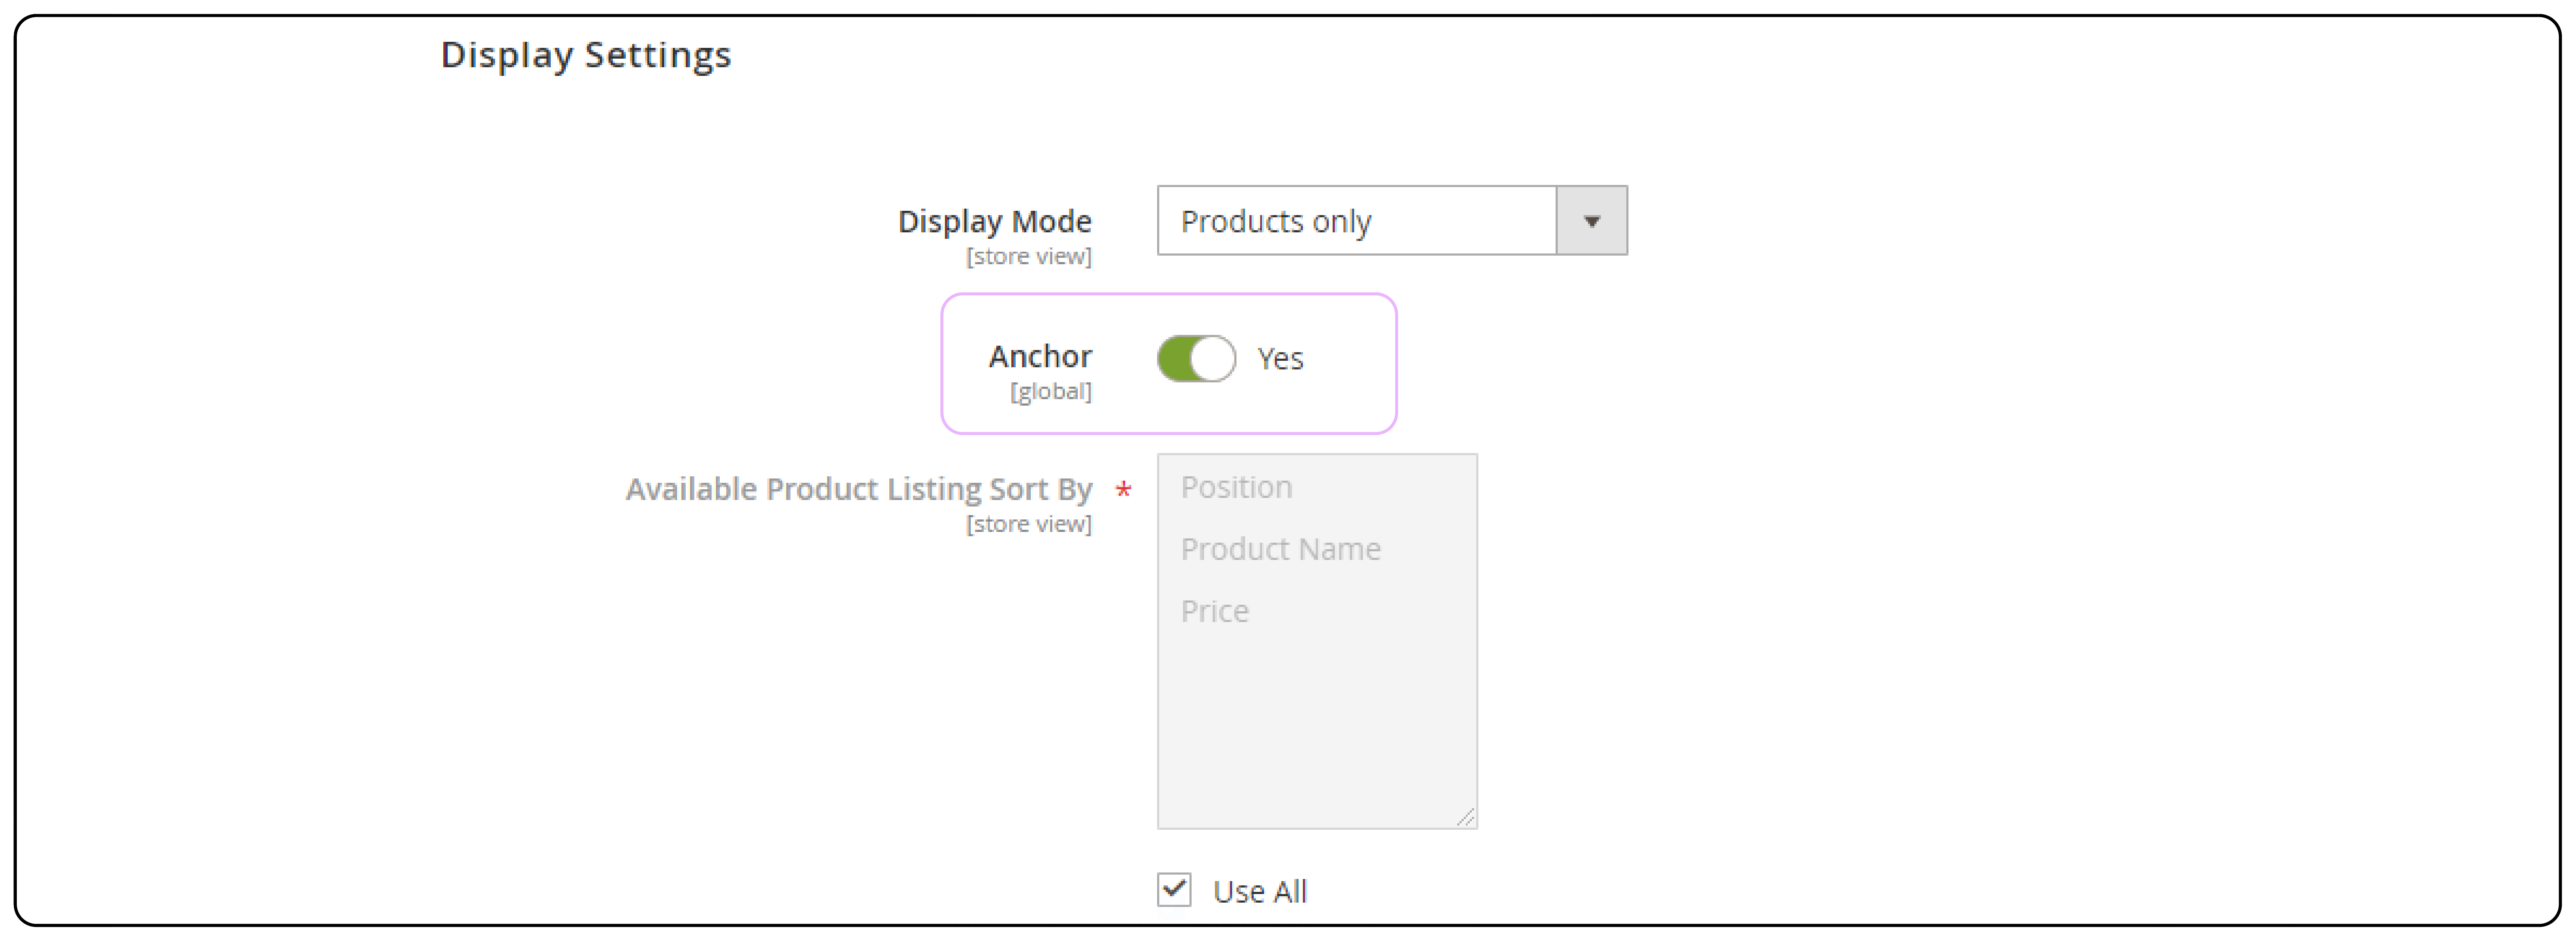 Category Display Settings in Magento 2 Admin